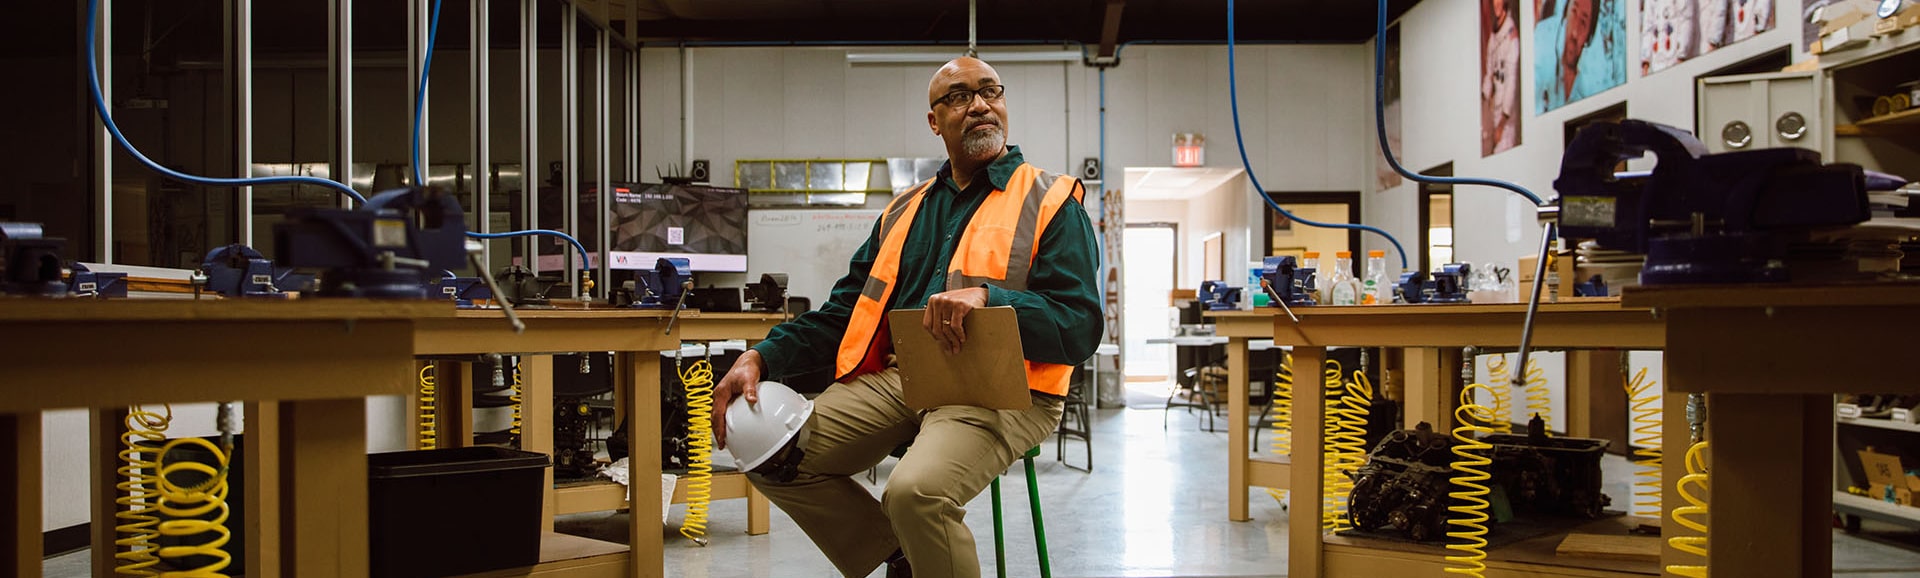 A photo of a man in an orange vest sitting amid a workshop